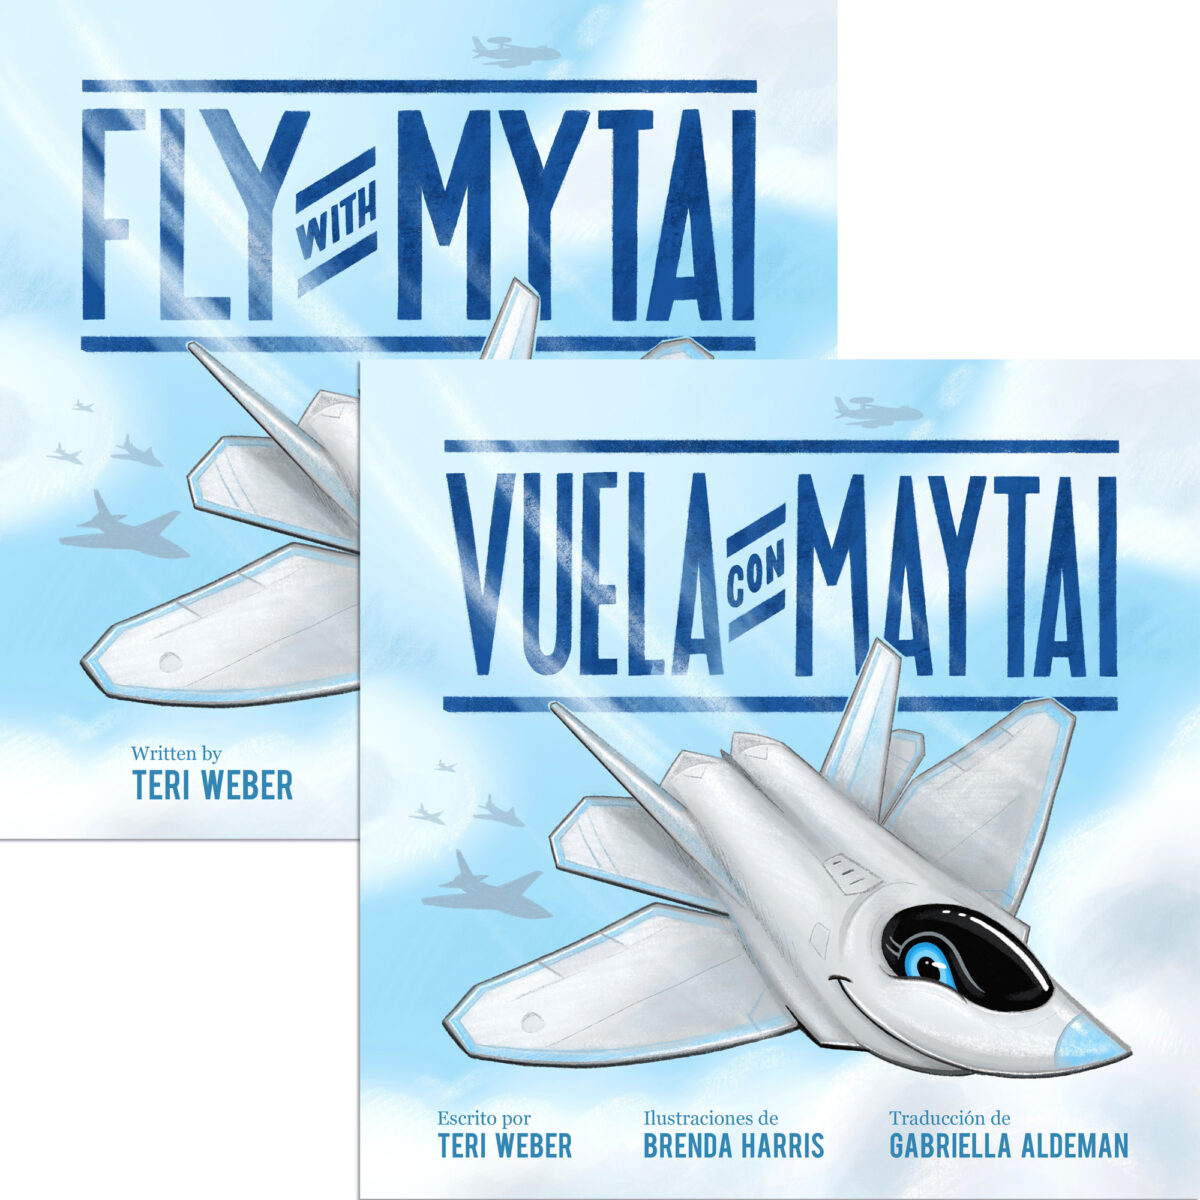 Fly with Mytai (English) and Vuela con Mytai (Spanish) picture books by Teri Weber, illustrated by Brenda Harris, translated by Gabriella Aldeman, published by Elva Resa